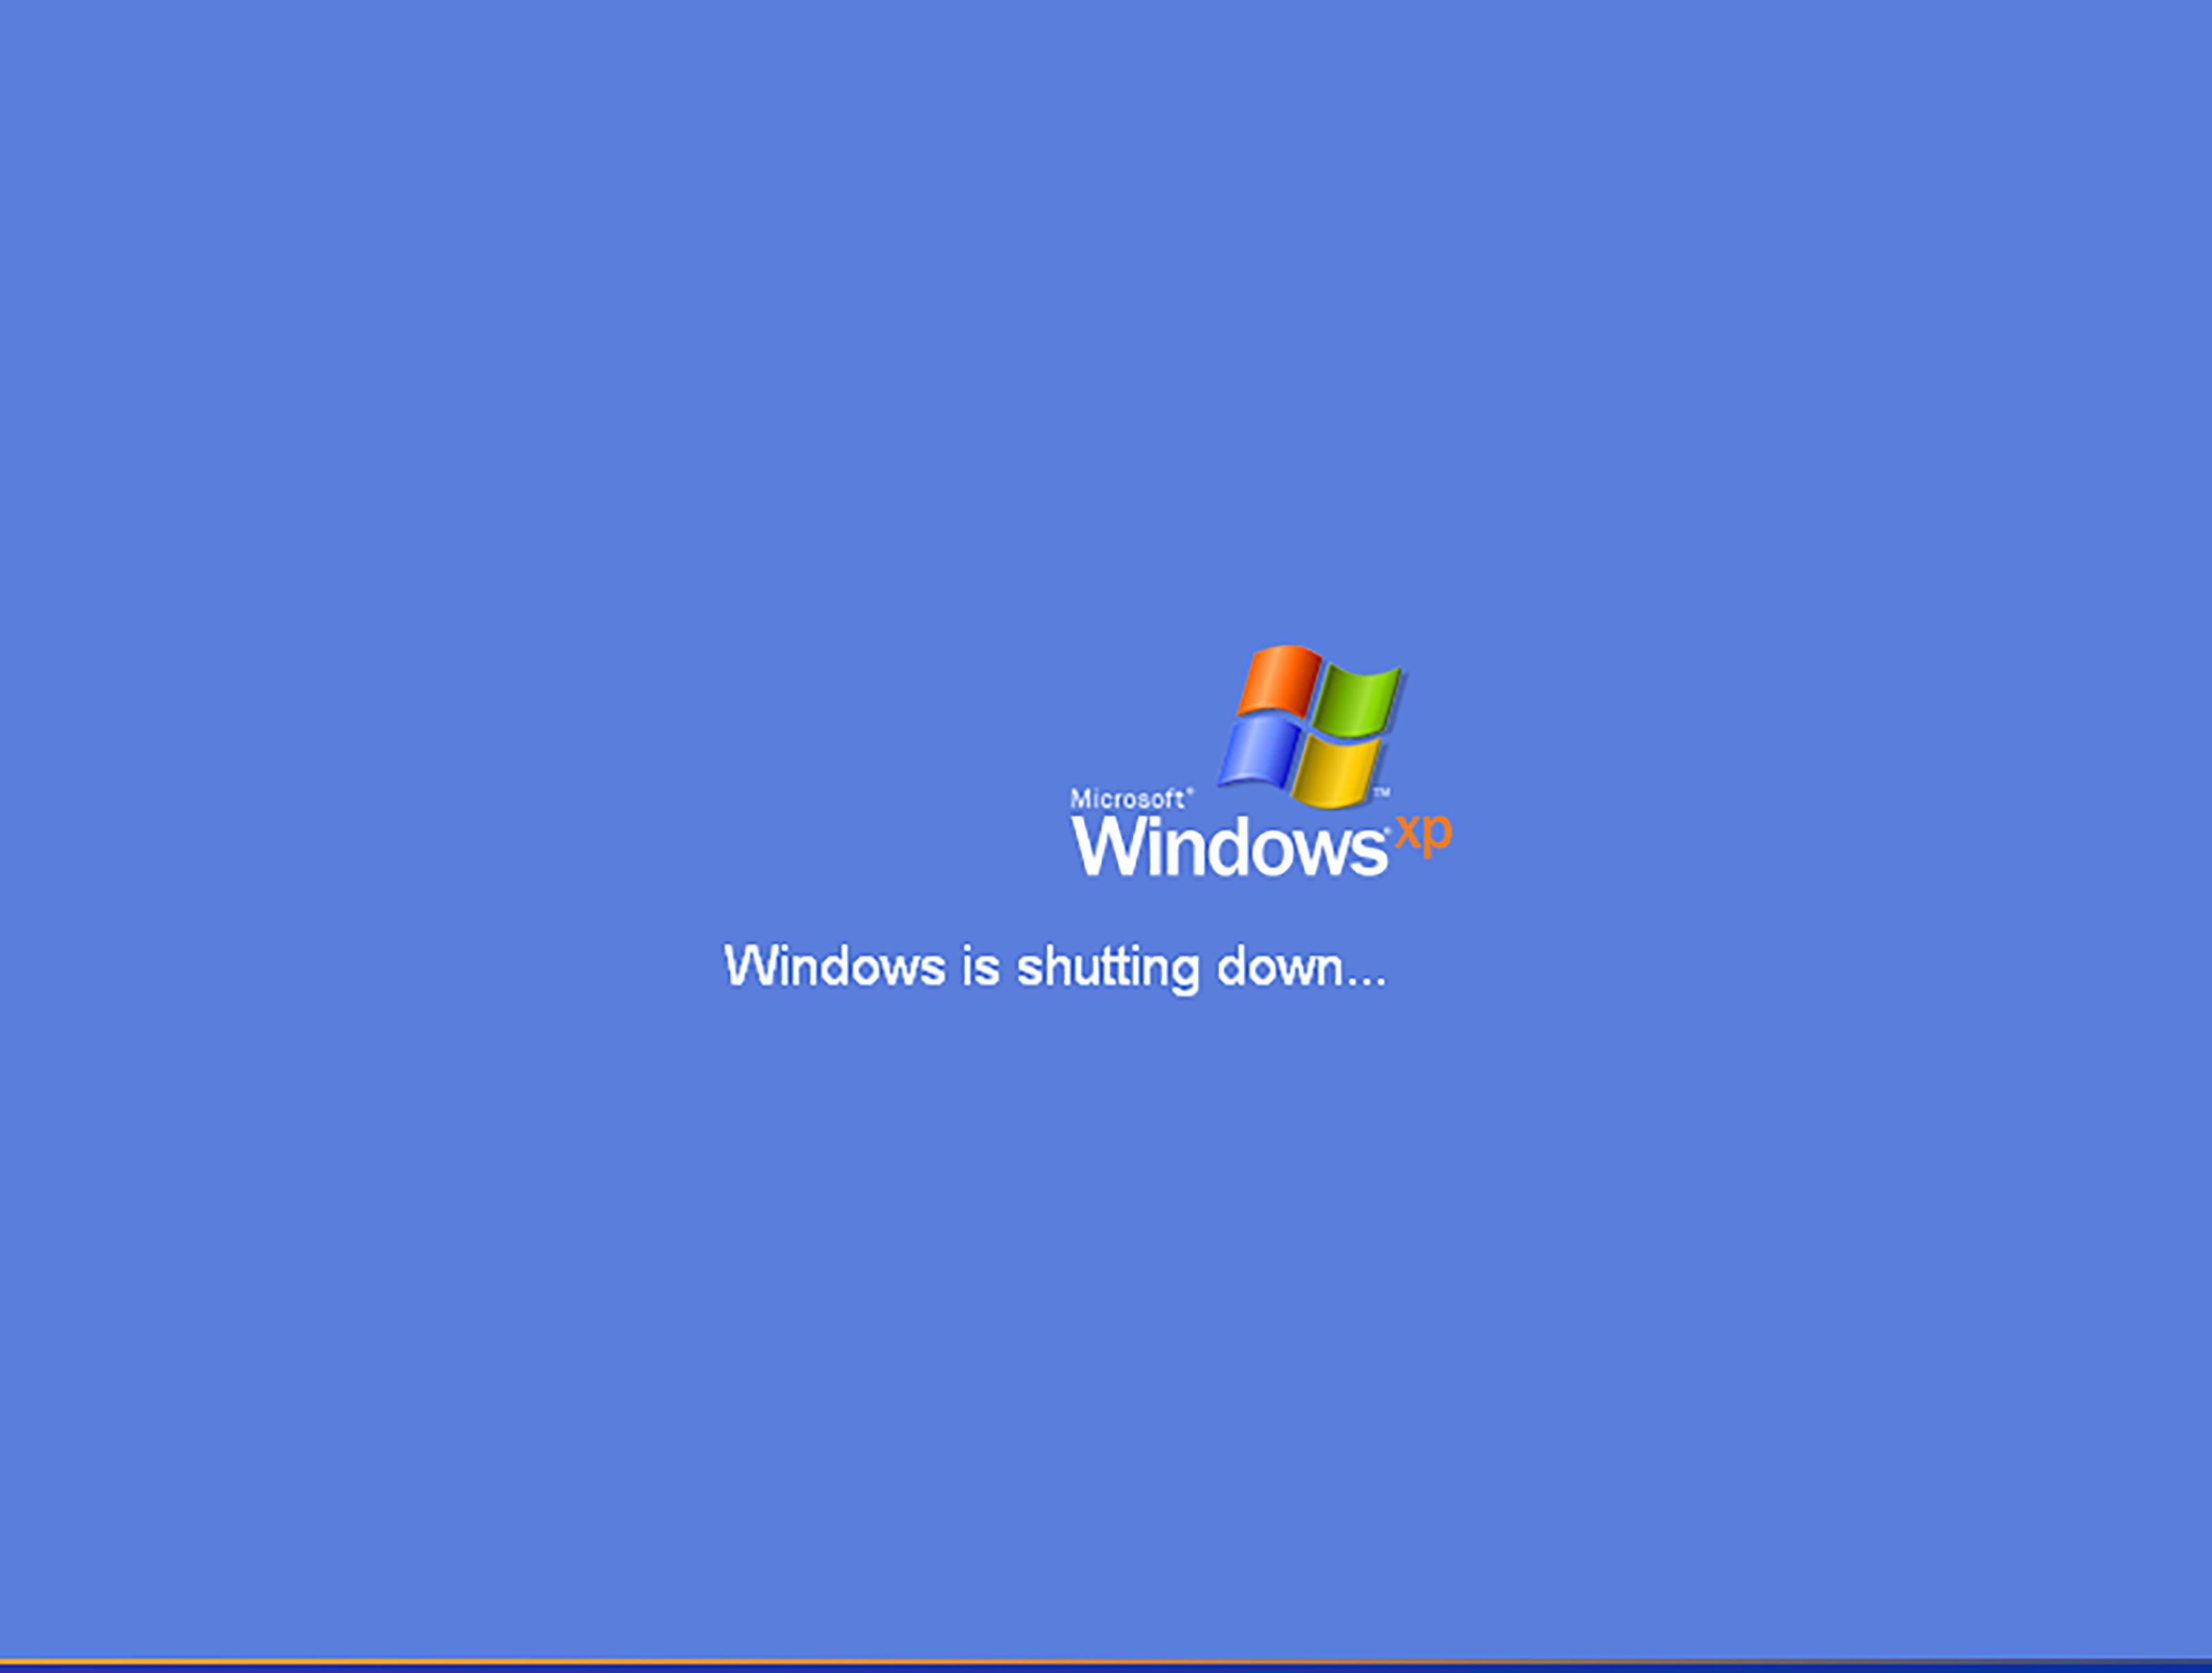 WinXP Logo - How to Shut Down Windows XP: 4 Steps (with Pictures) - wikiHow